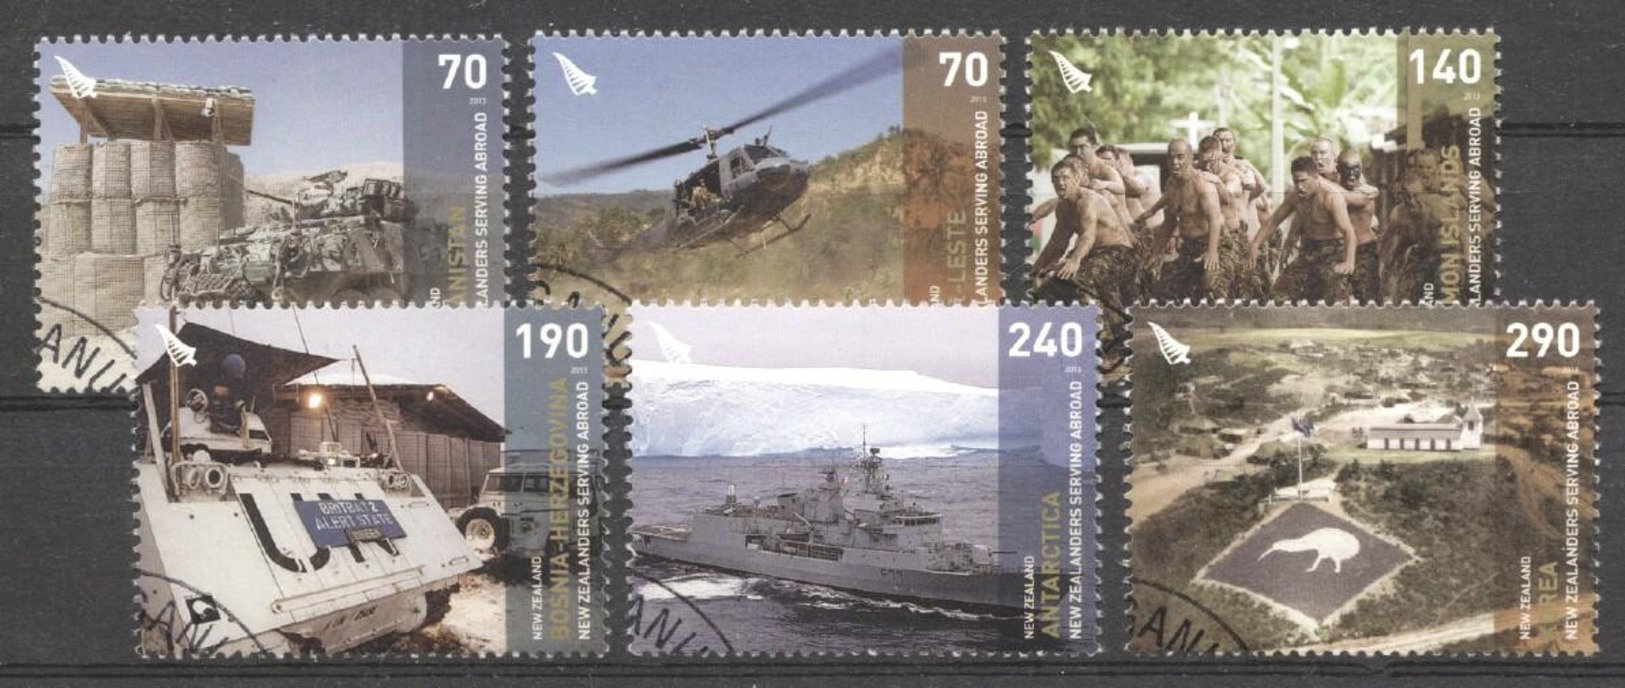 New Zealand 2013 - Used - Army, Helicopter (265820) - Hubschrauber